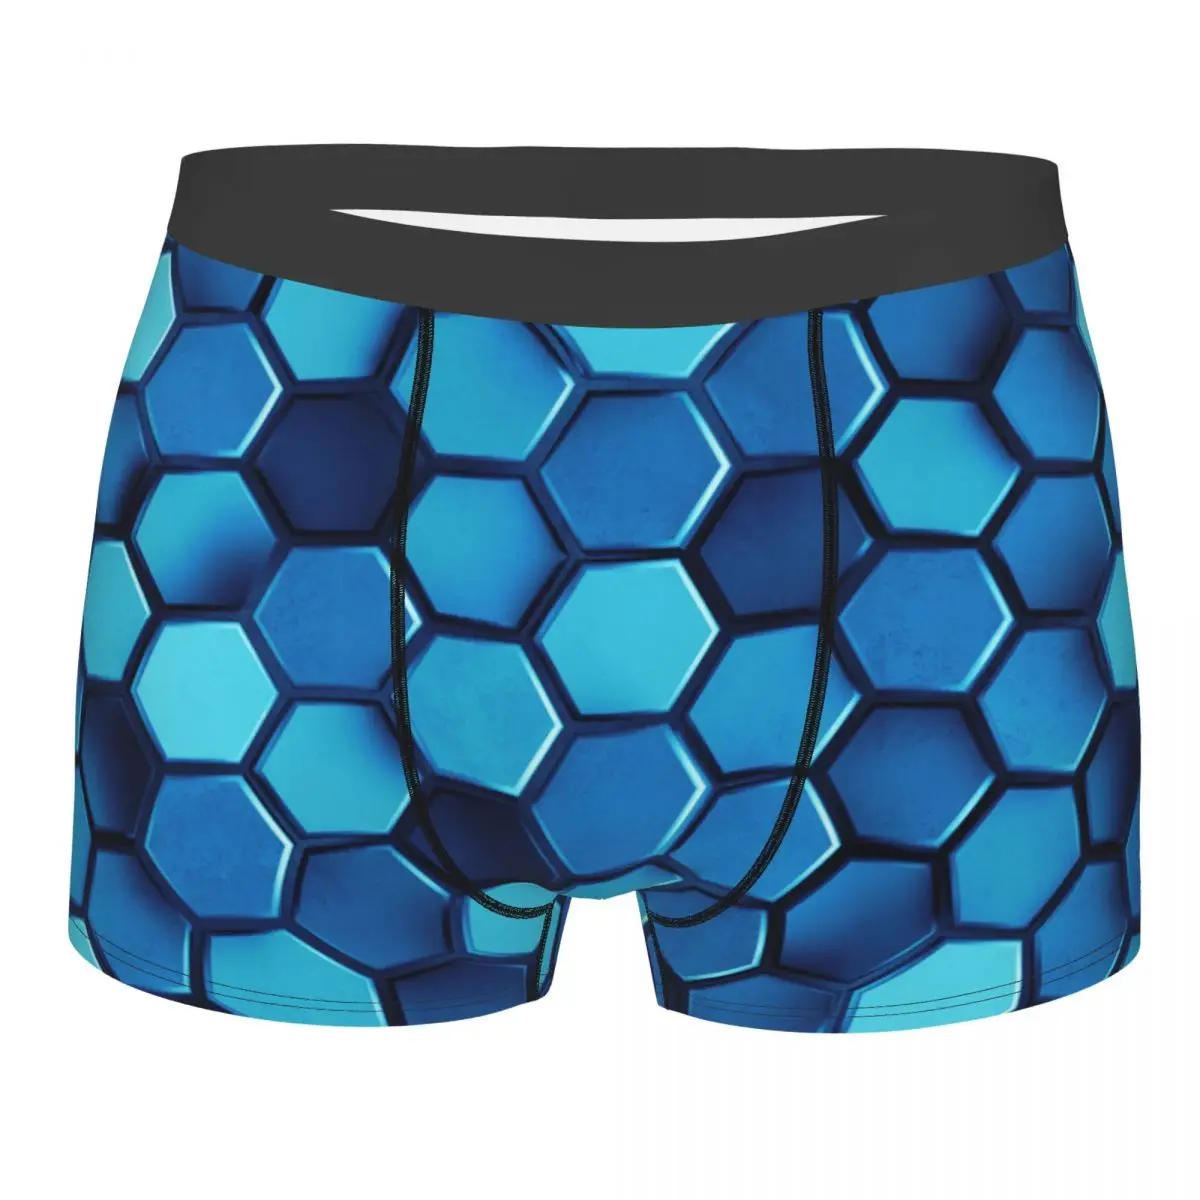 

Hot Boxer Abstract 3d Honeycomb Rendering Shorts Panties Men Underwear Blue Hexagon Pattern Breathable Underpants for Homme